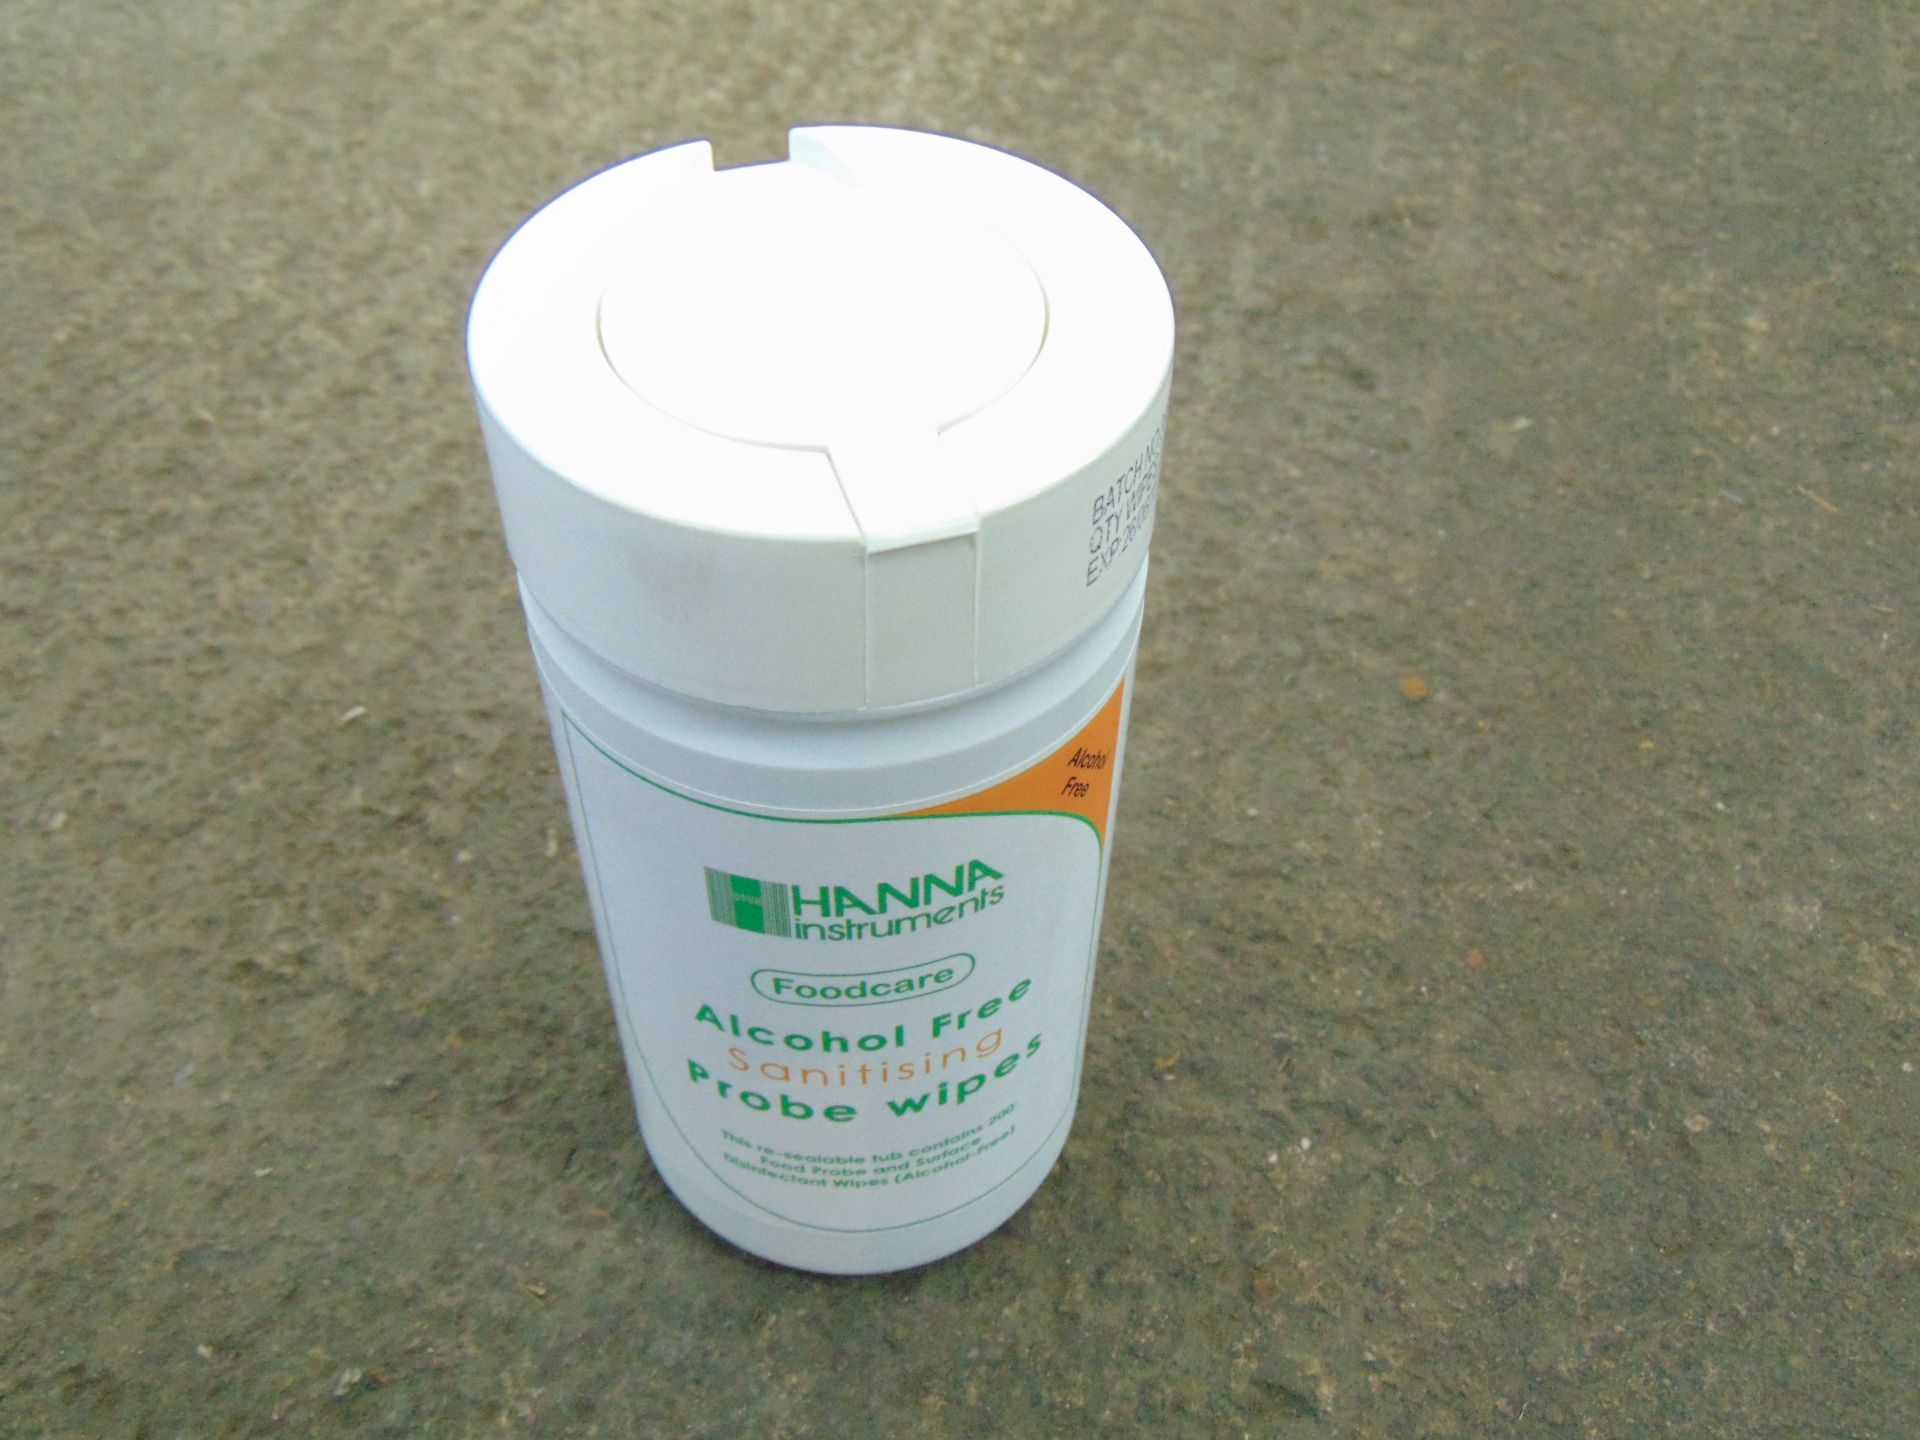 30 x Alcohol Free Sanitising Wipe Re-Sealable Tubs - Image 2 of 3